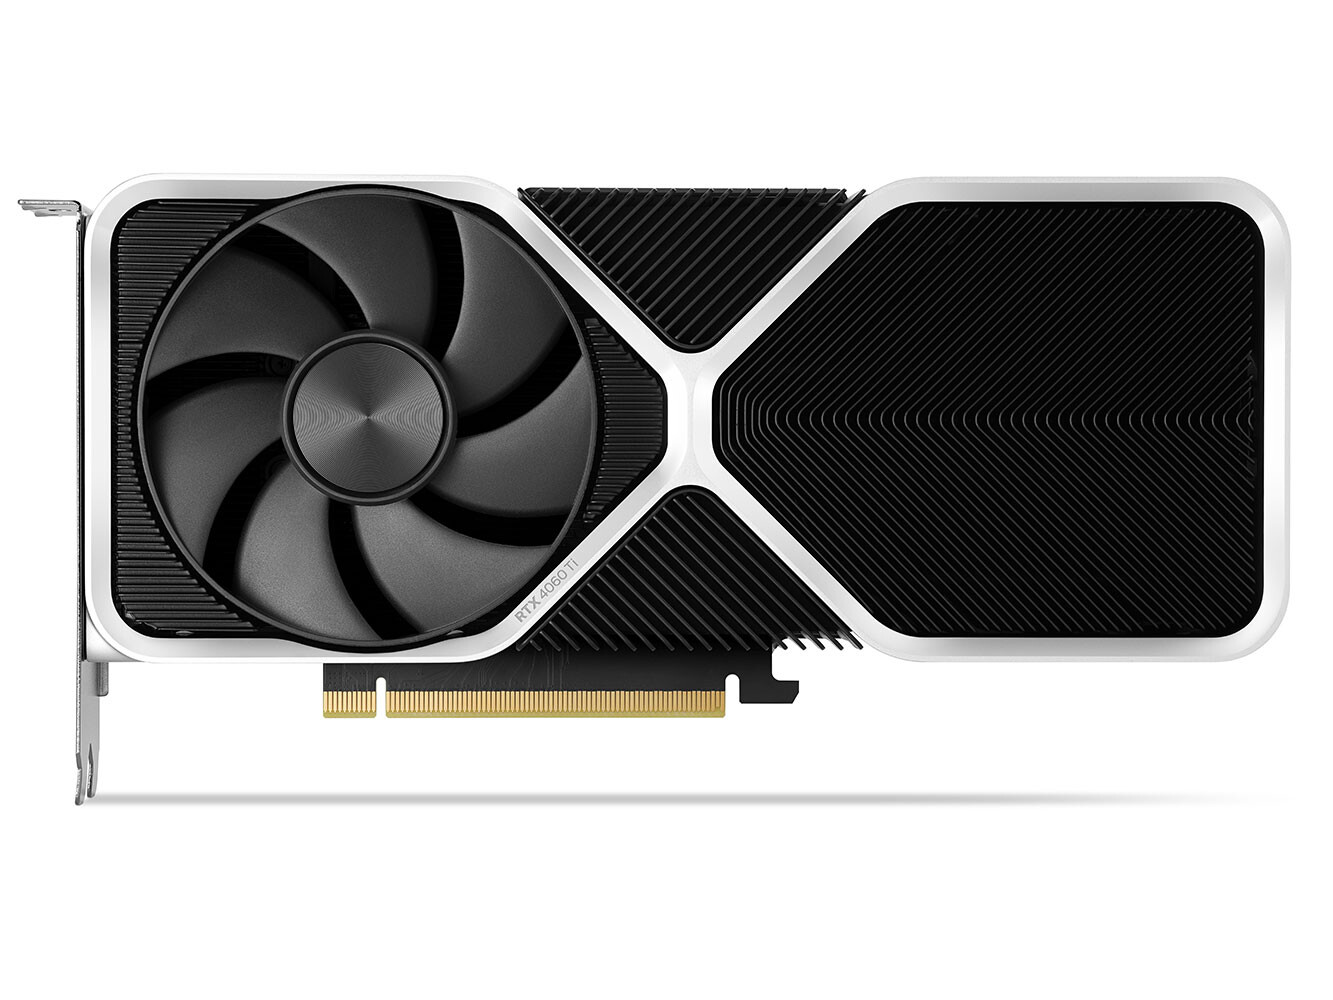 GeForce RTX 4060 Ti and 4060, Starting at $299, Are on Their Way